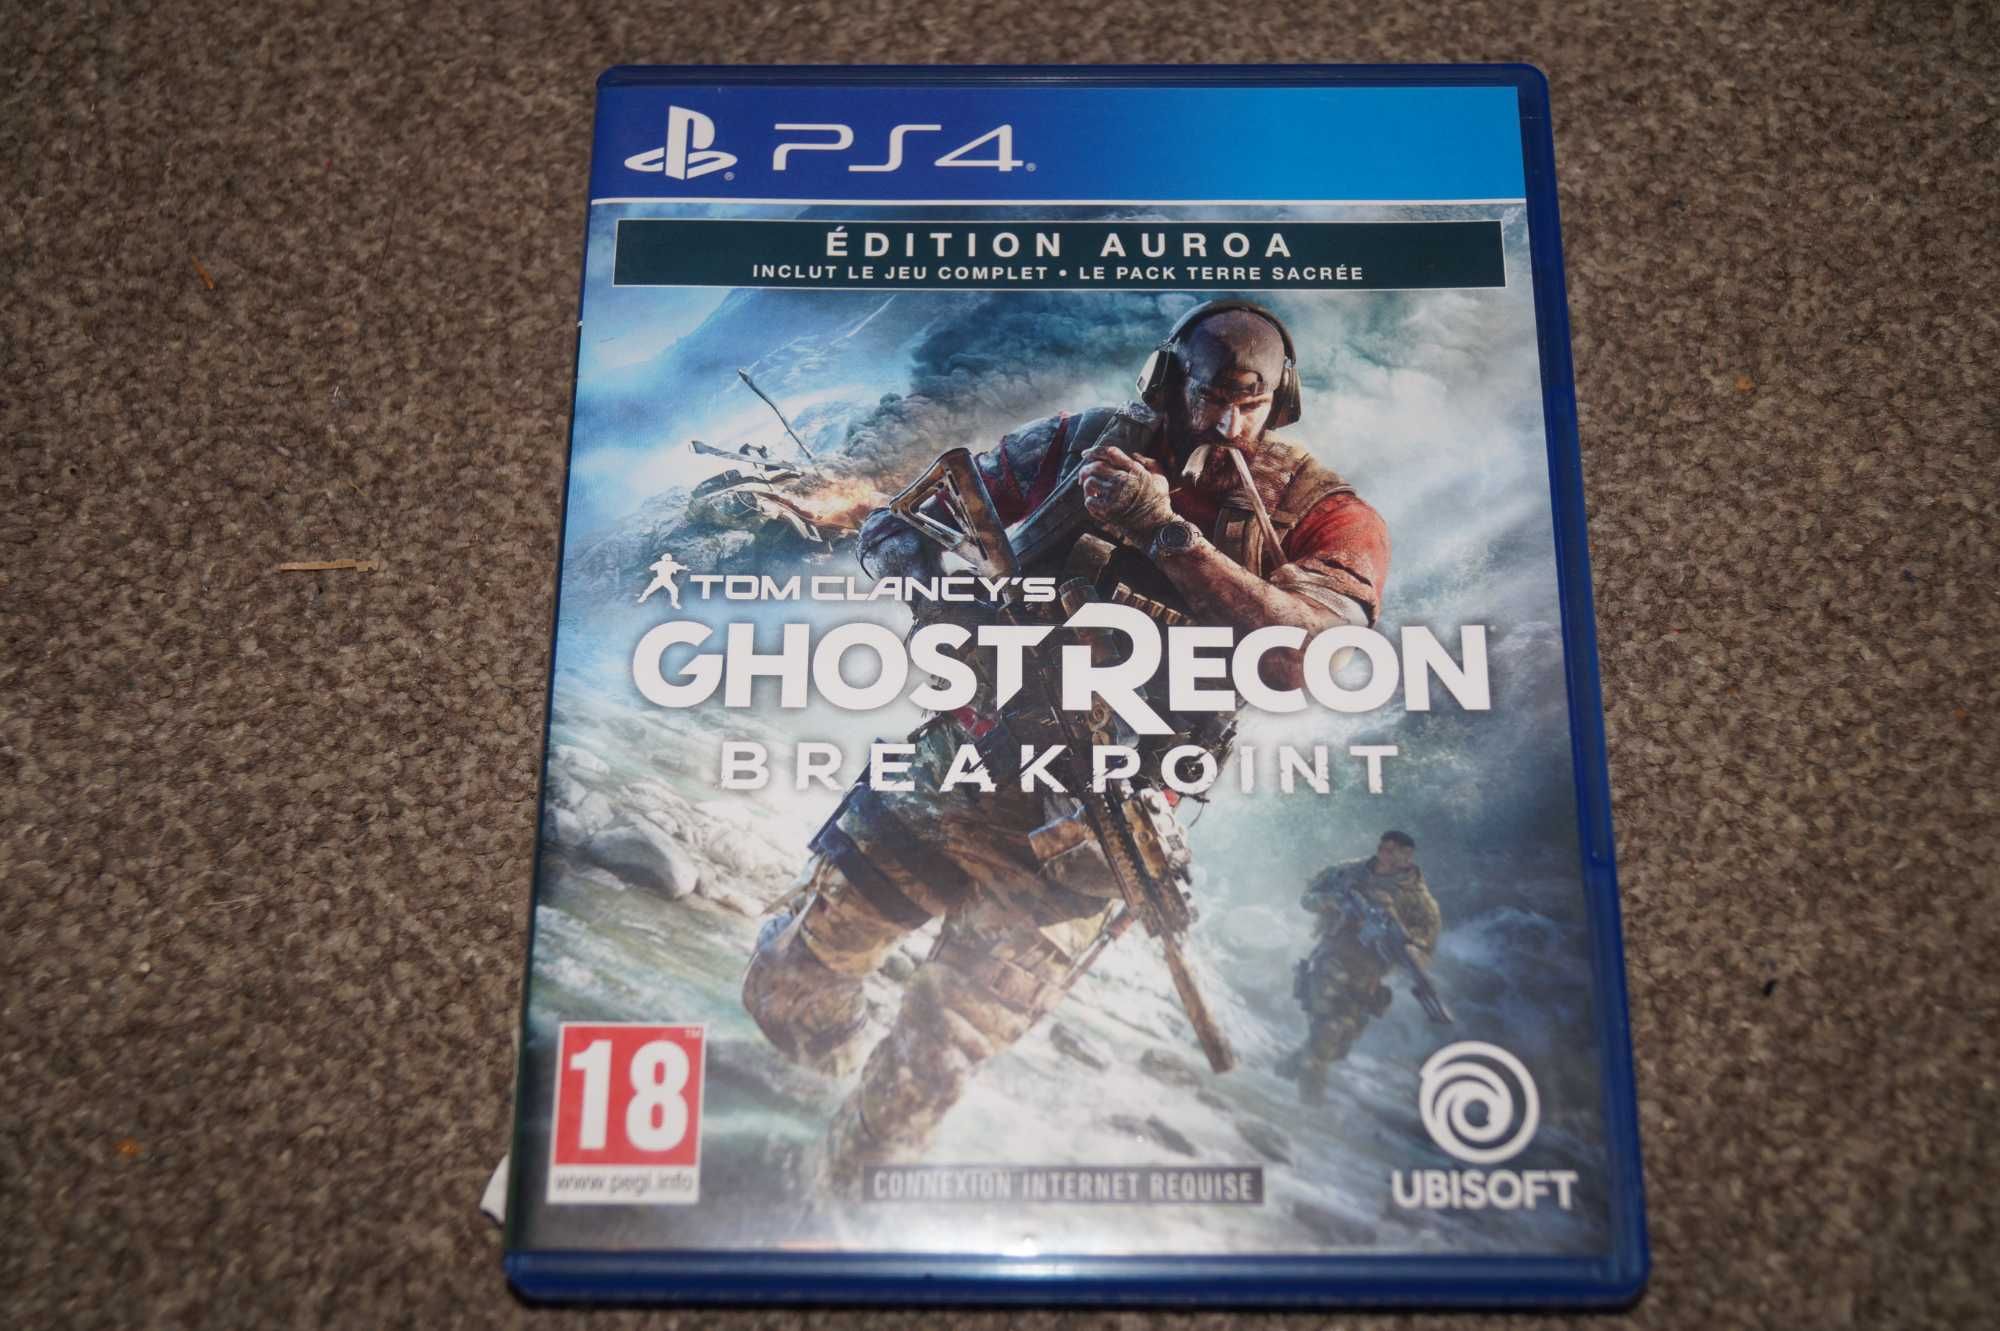 Ghost Recorn Breakpoint ps4